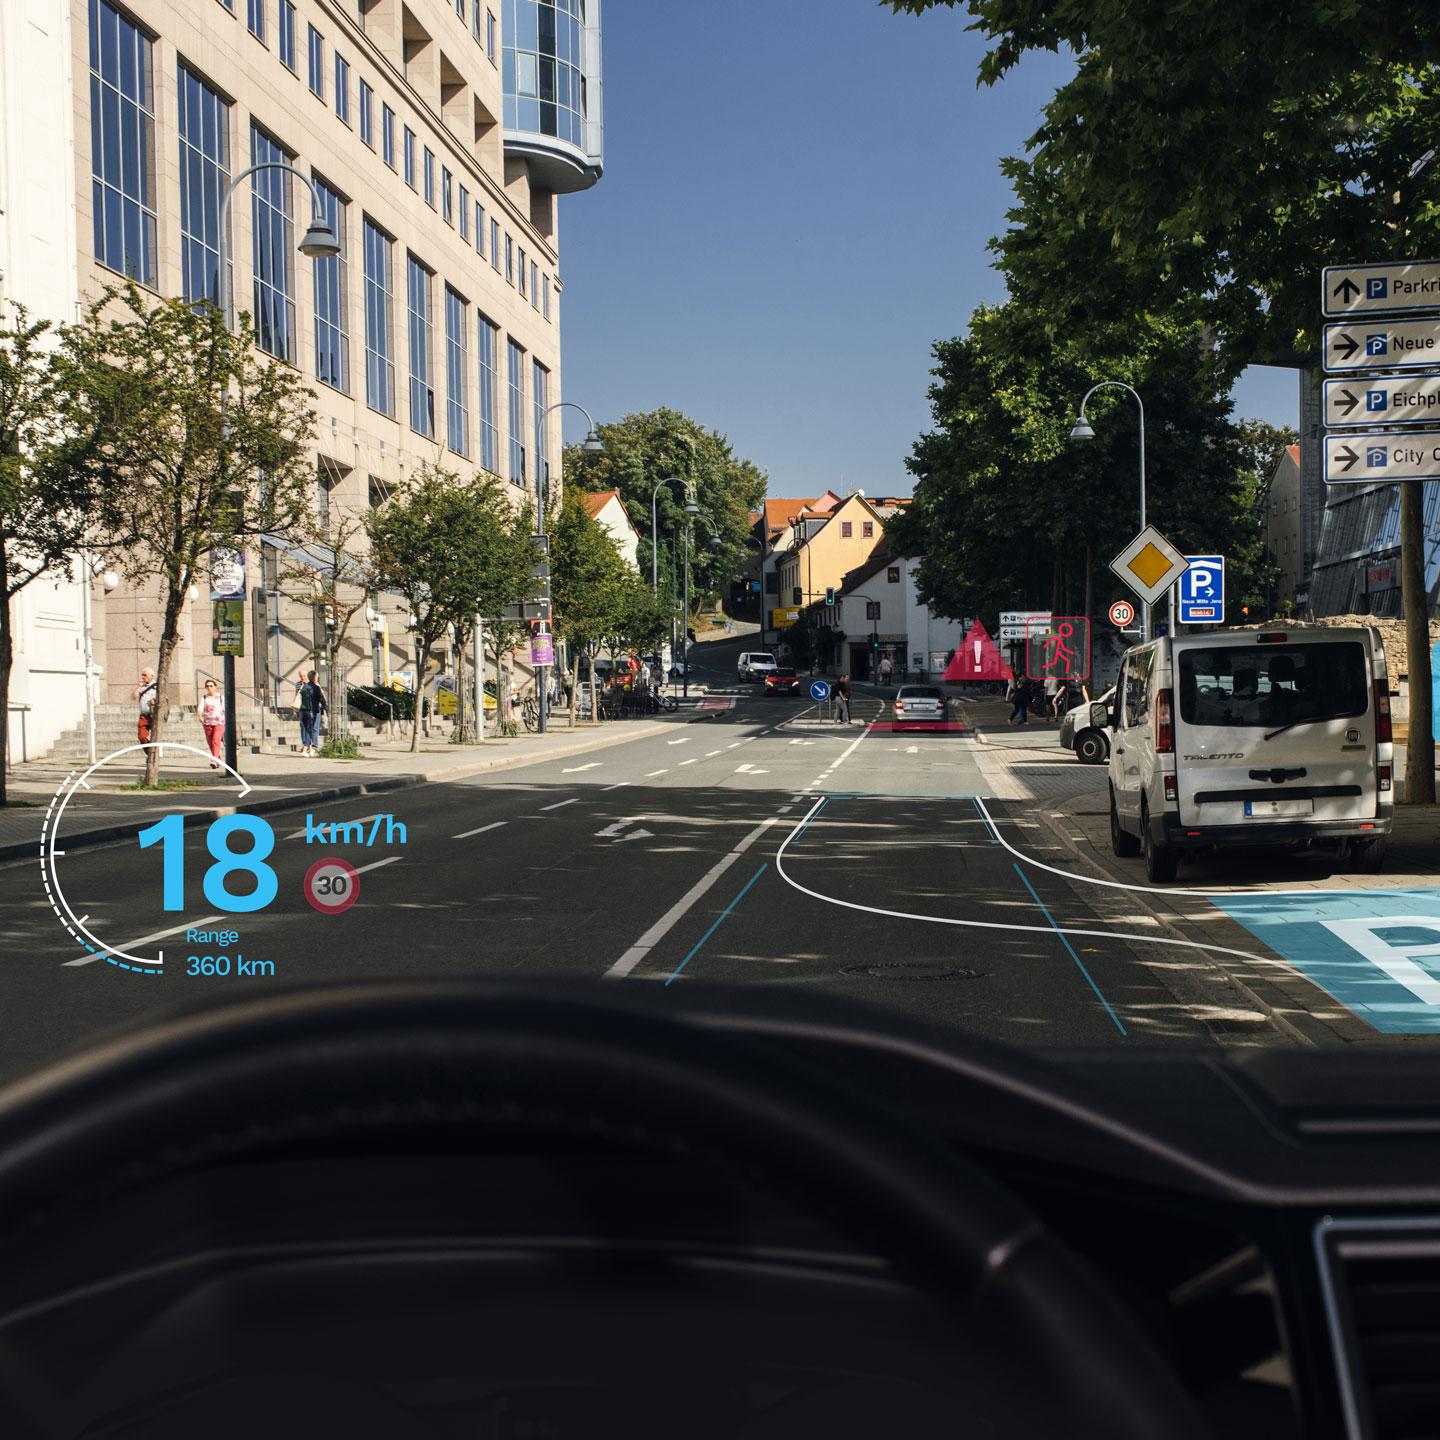 ZEISS launches the age of holography for automobiles